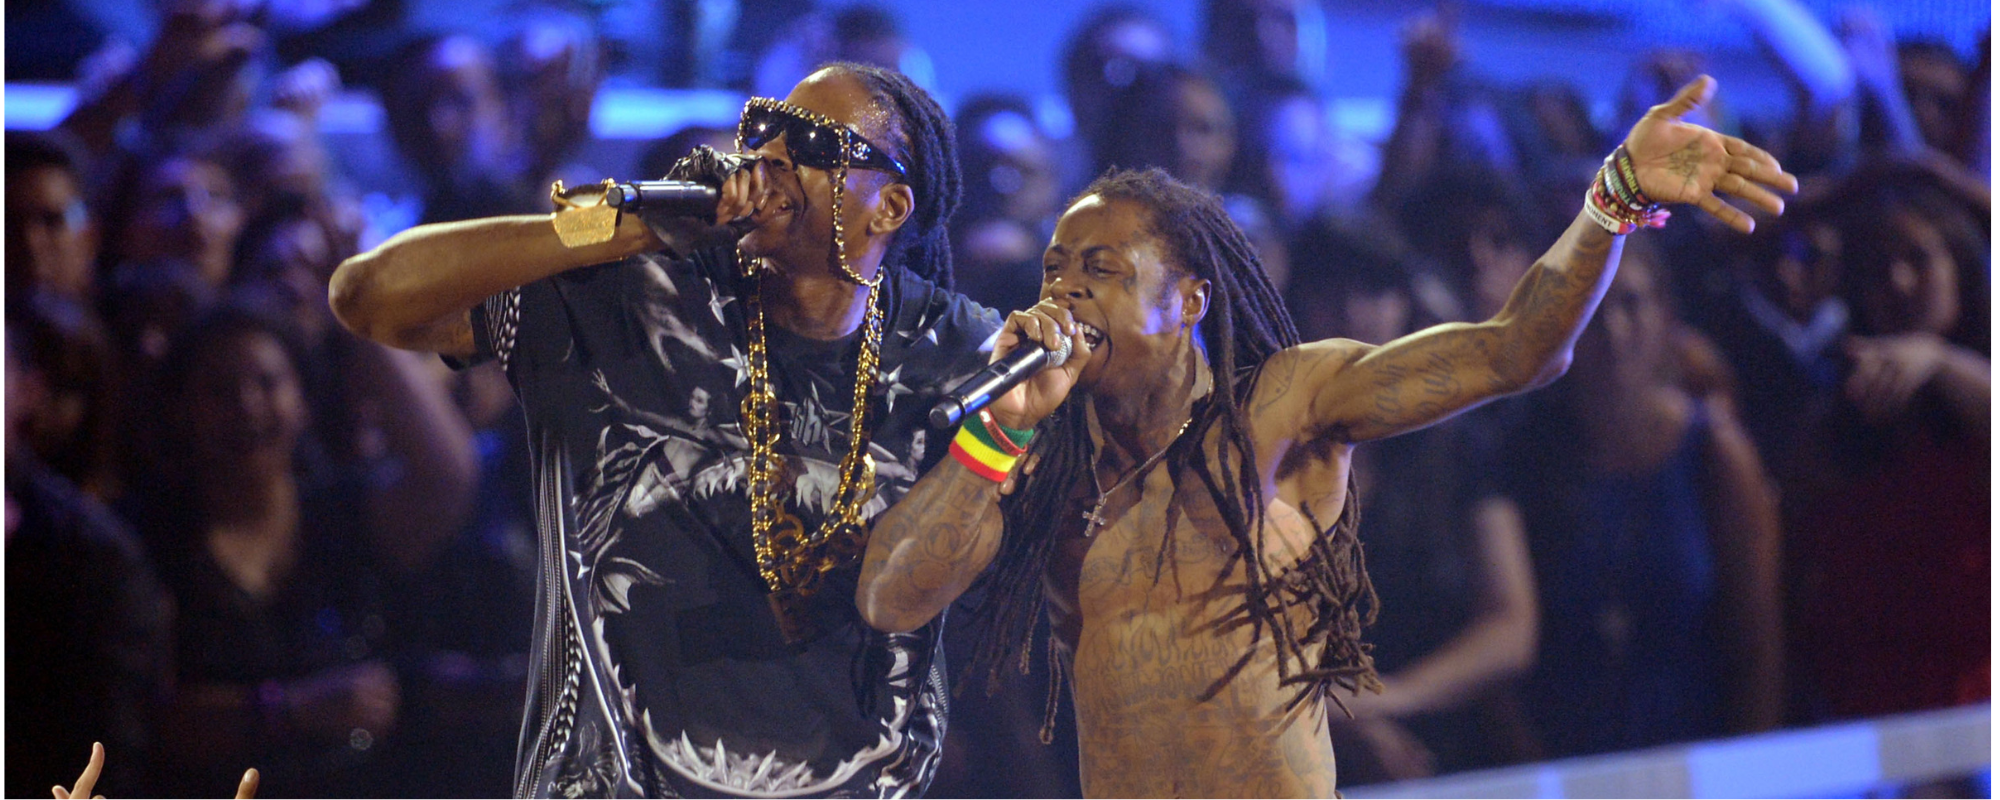 Review: Lil Wayne and 2 Chainz Rekindle Their Magic on ‘Welcome 2 Collegrove’